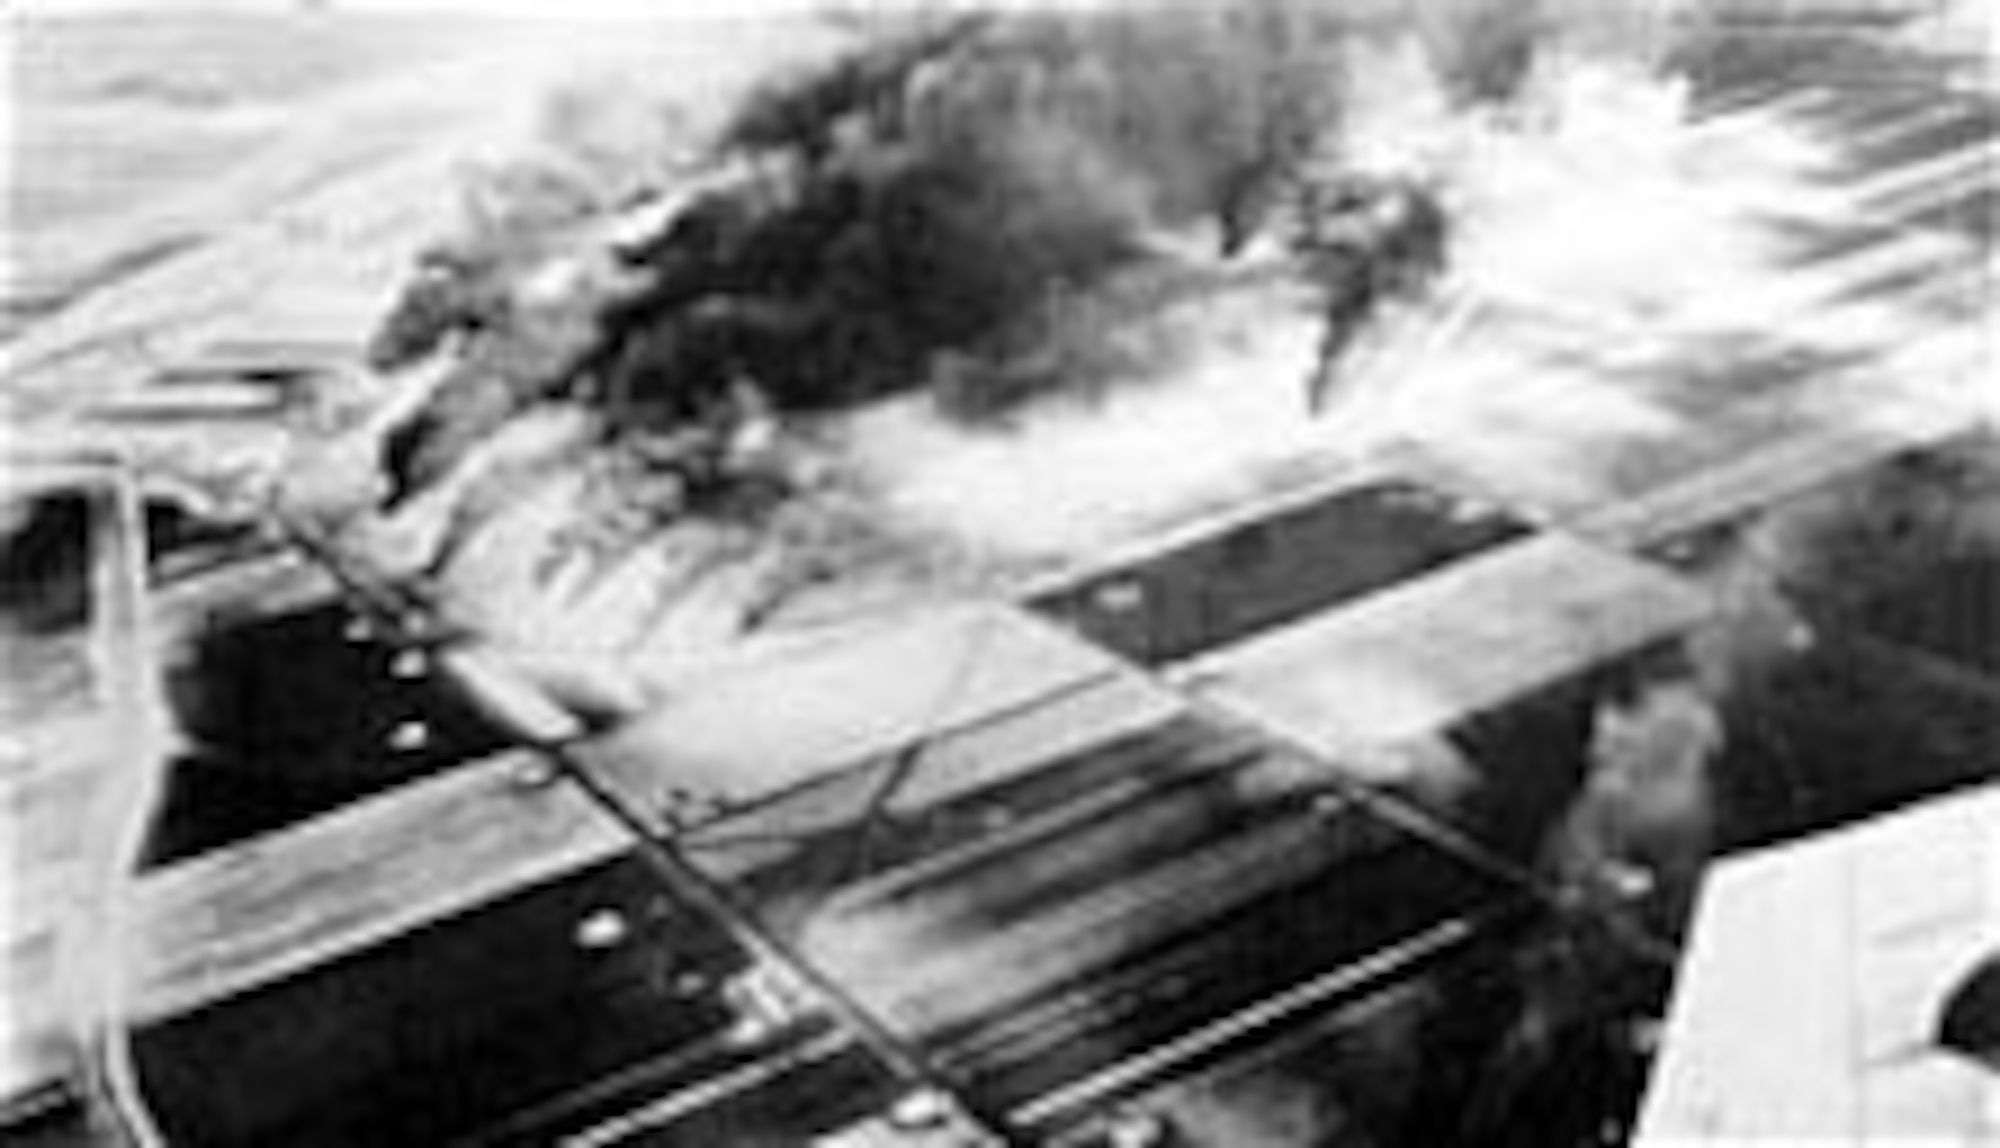 Luftwaffe airfield near Gotha, Germany, on Feb. 9, 1945, after AAF P-51s had destroyed 34 German planes on the ground. (U.S. Air Force photo)